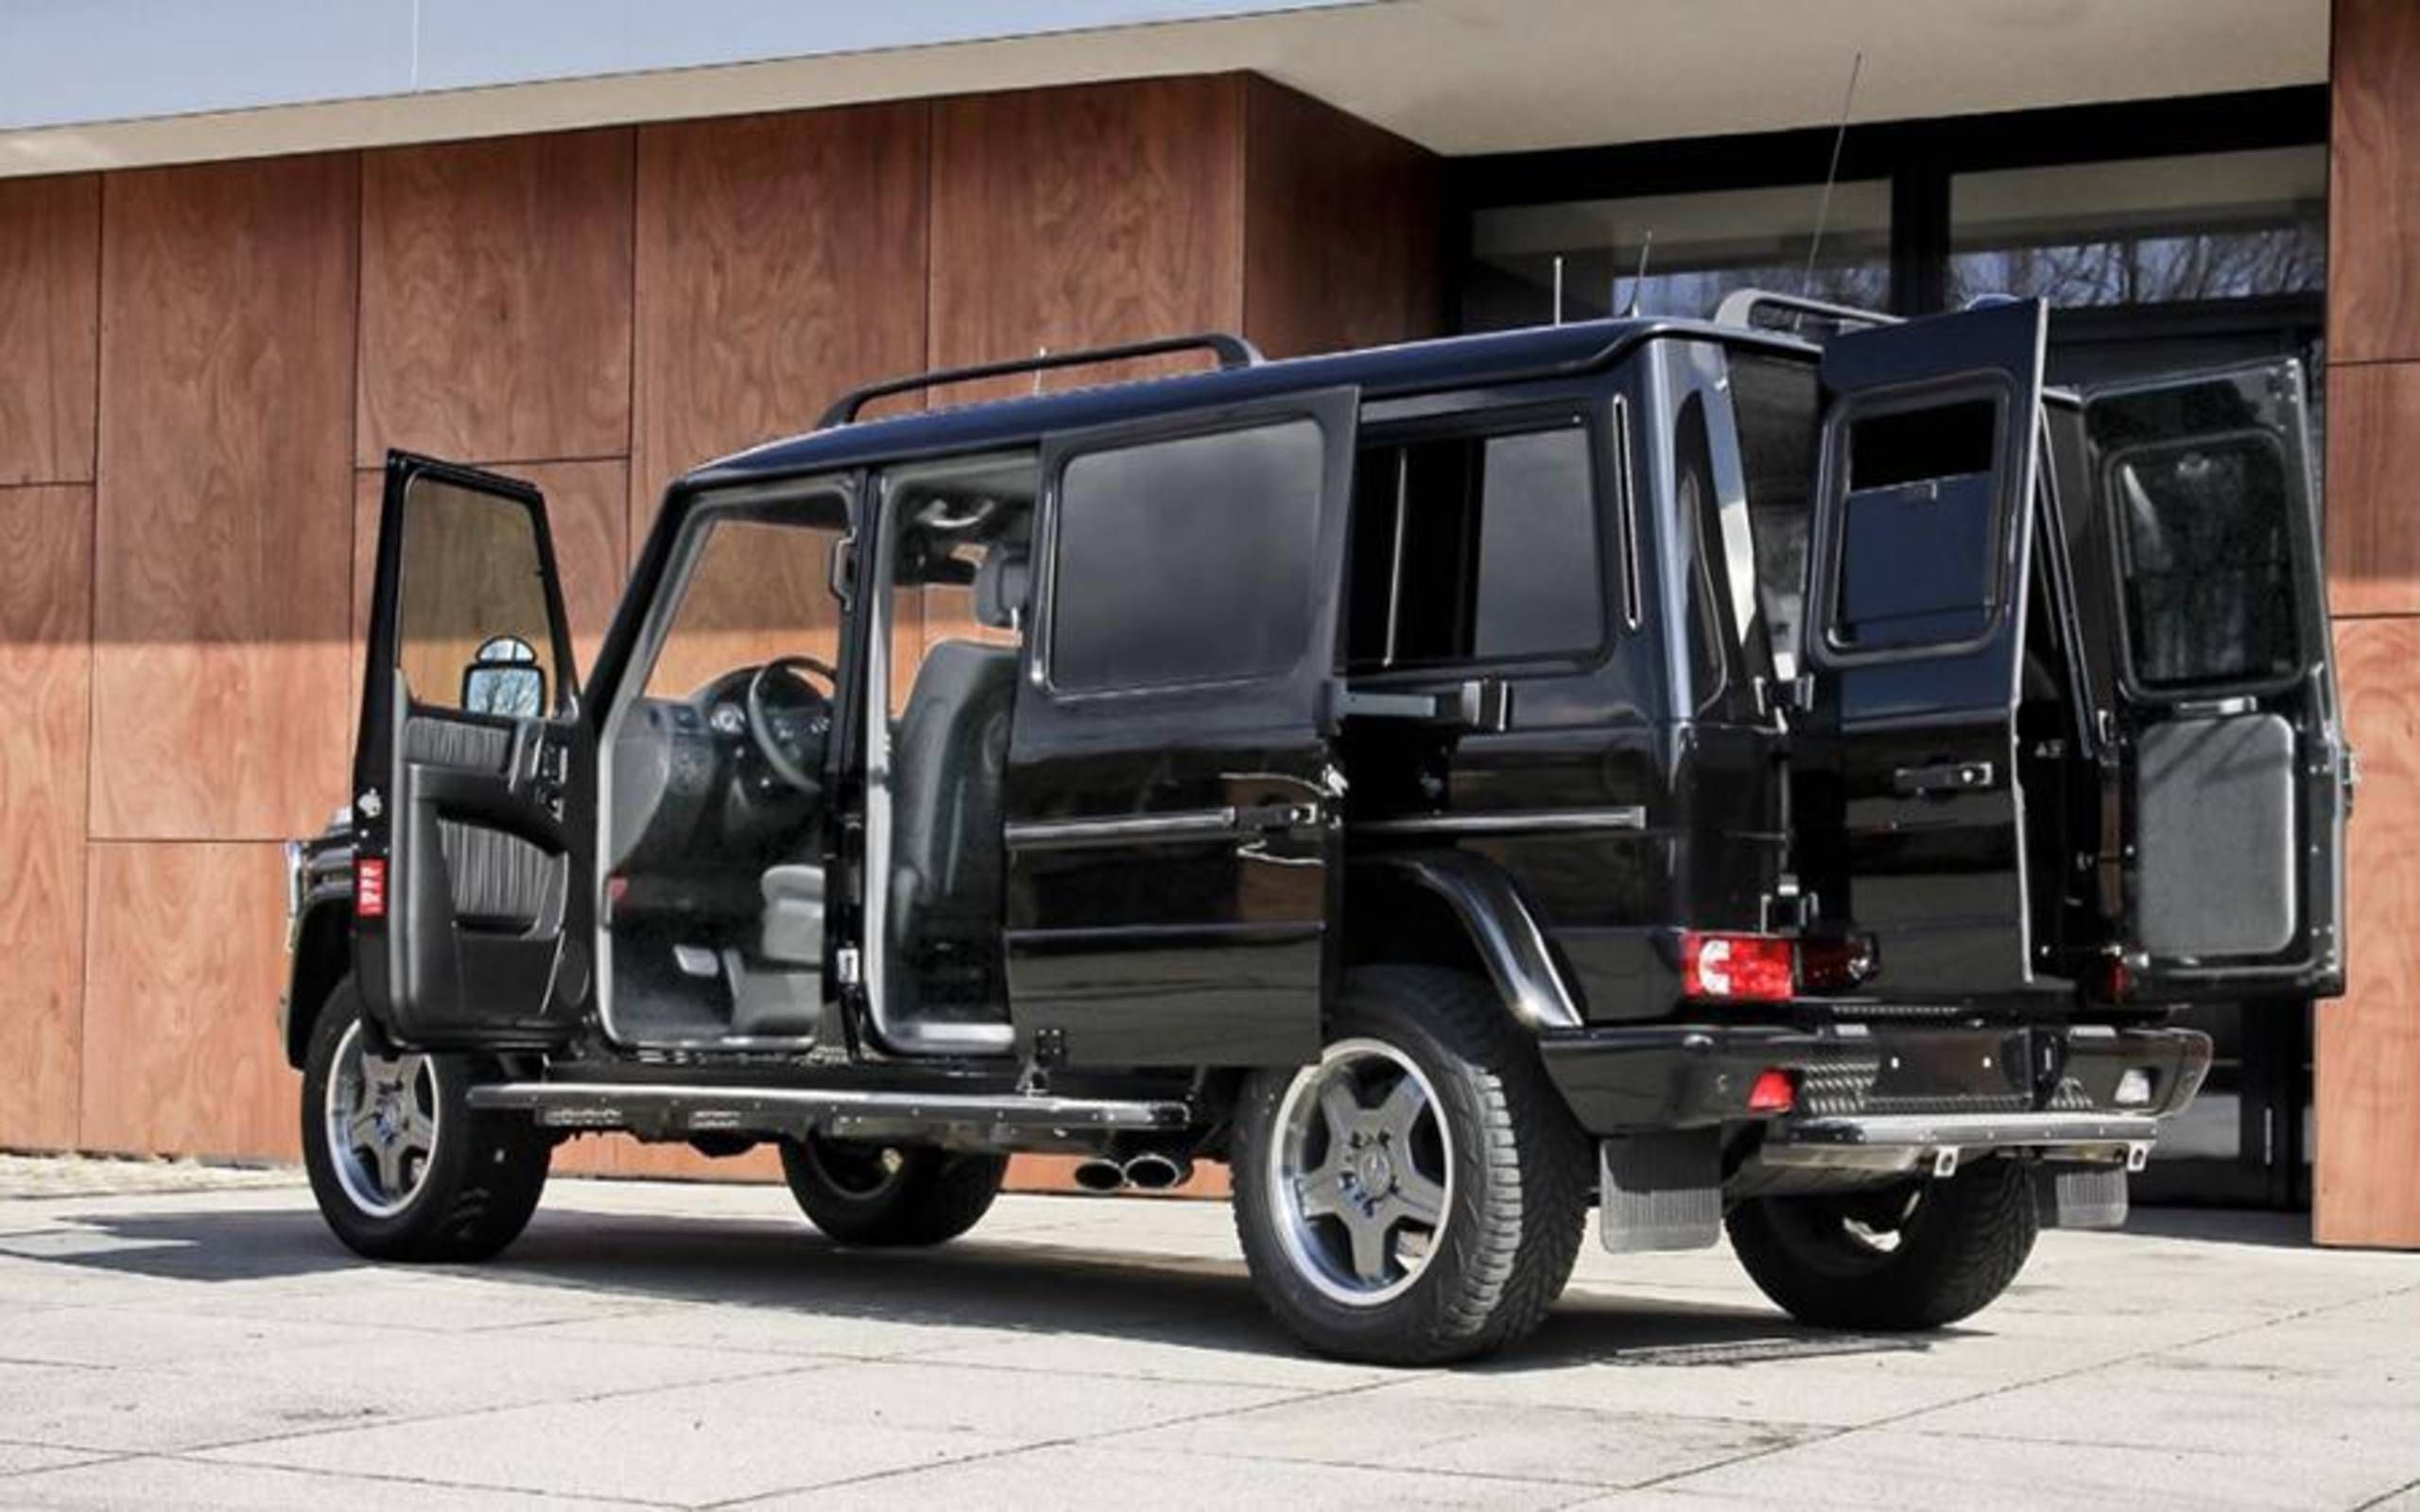 The Most Exclusive Mercedes Benz G Class Is This Stretched Binz